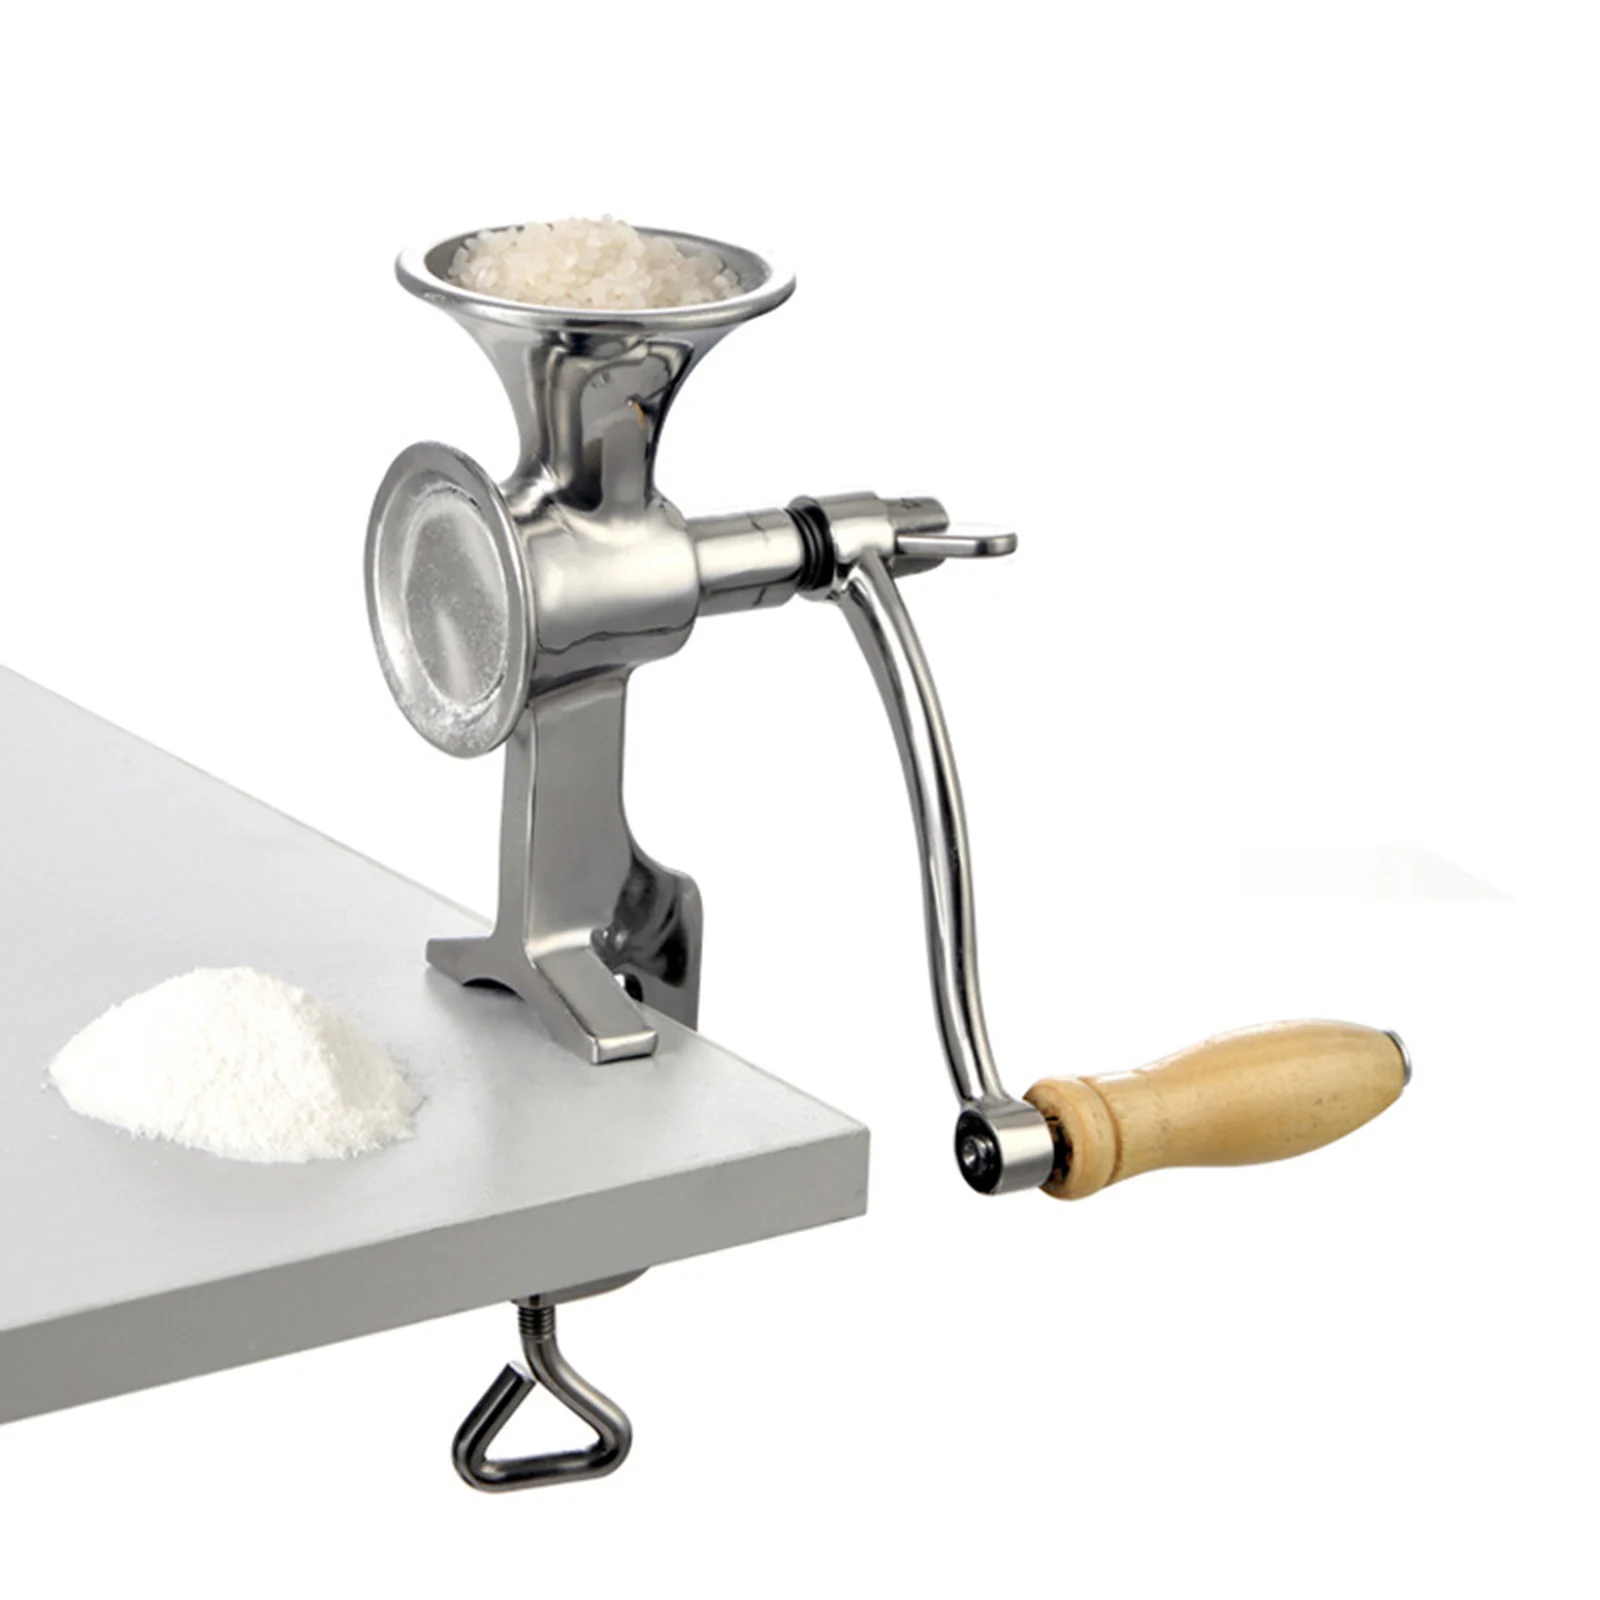 Hand Crank Grain Mill Stainless Steel Manual Grain Grinder for Seed Use